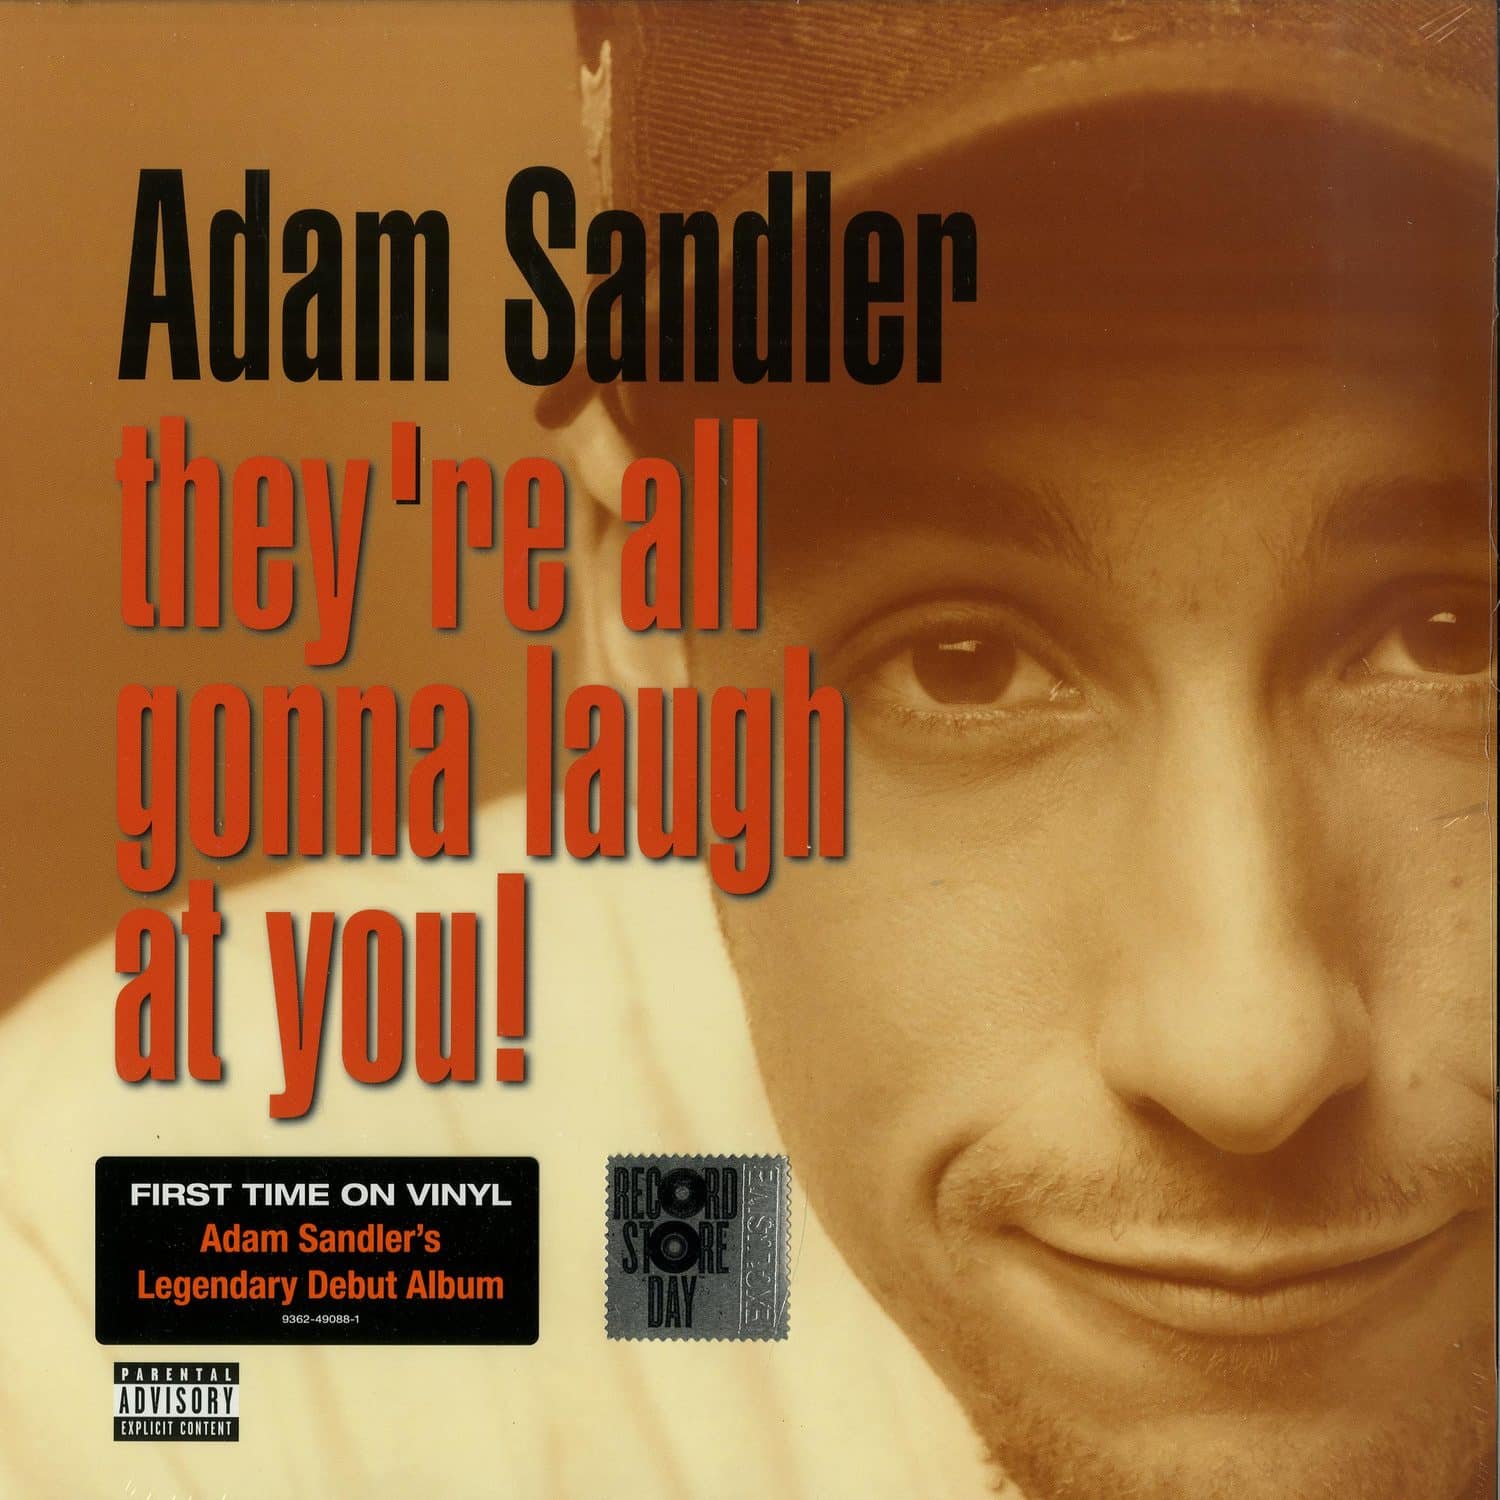 Adam Sandler - THEY RE ALL GONNA LAUGH AT YOU! 